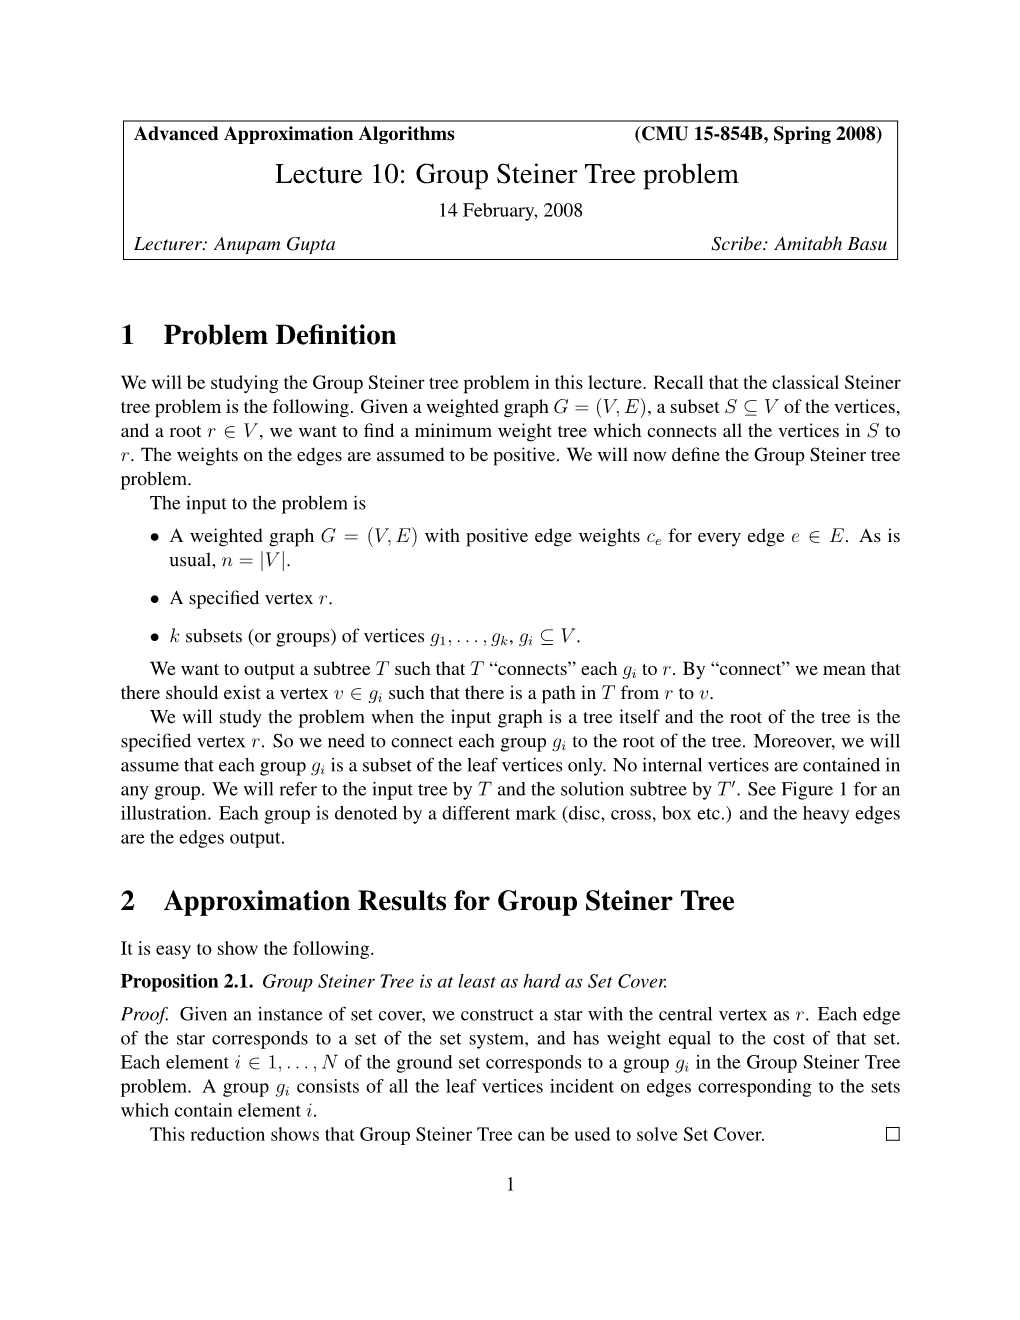 Lecture 10: Group Steiner Tree Problem 1 Problem Definition 2 Approximation Results for Group Steiner Tree